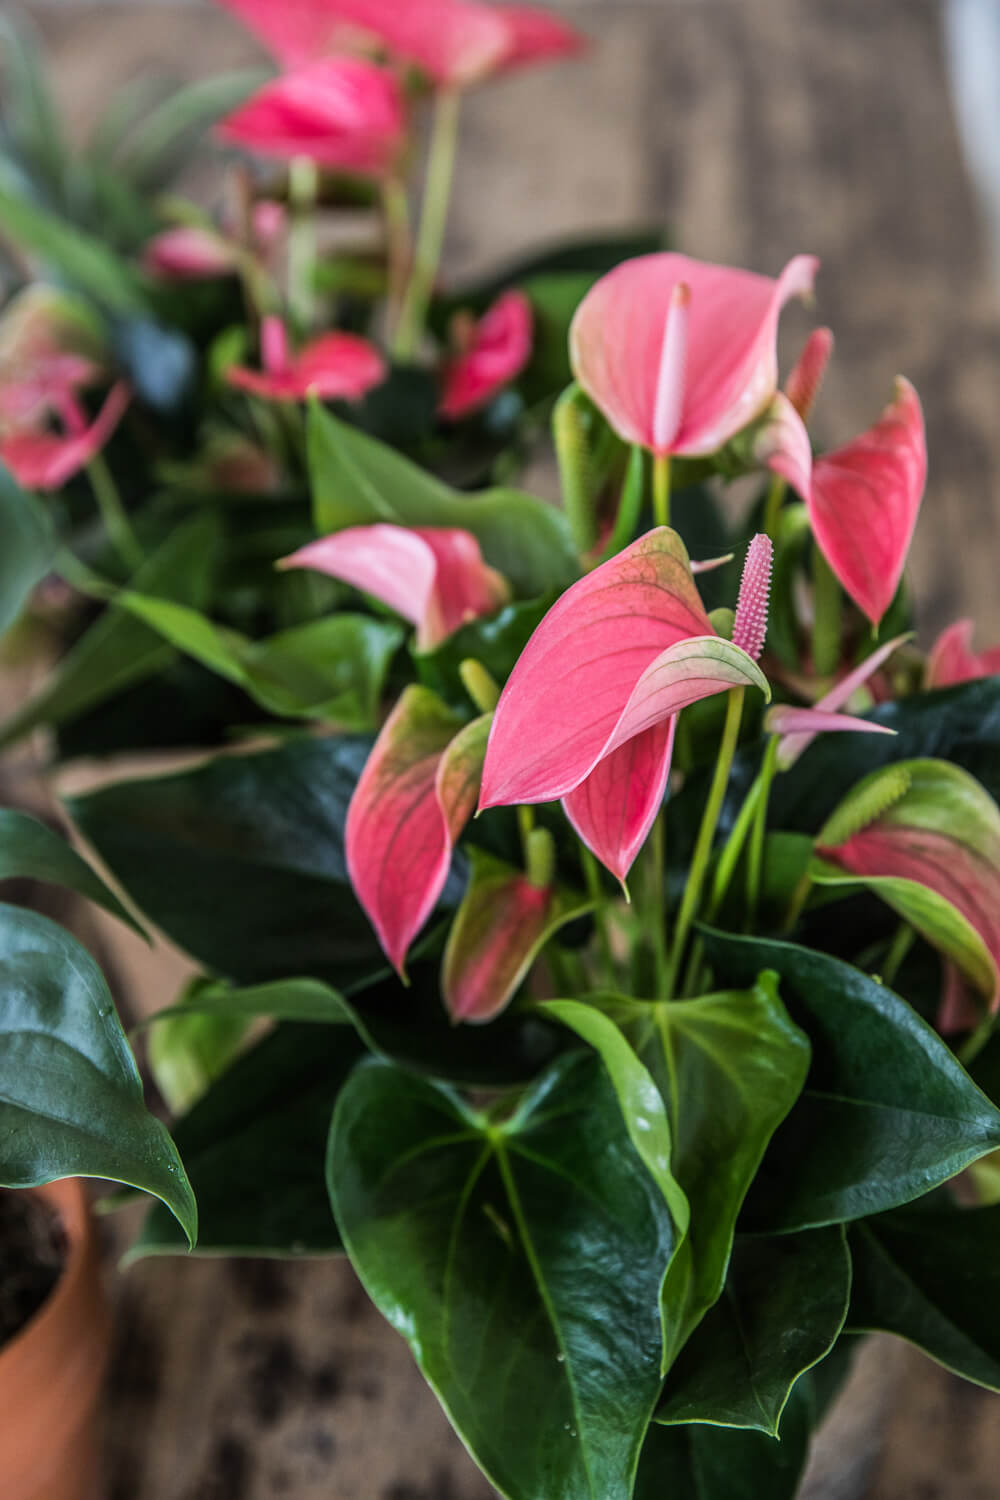 How sustainable are Anthuriums?